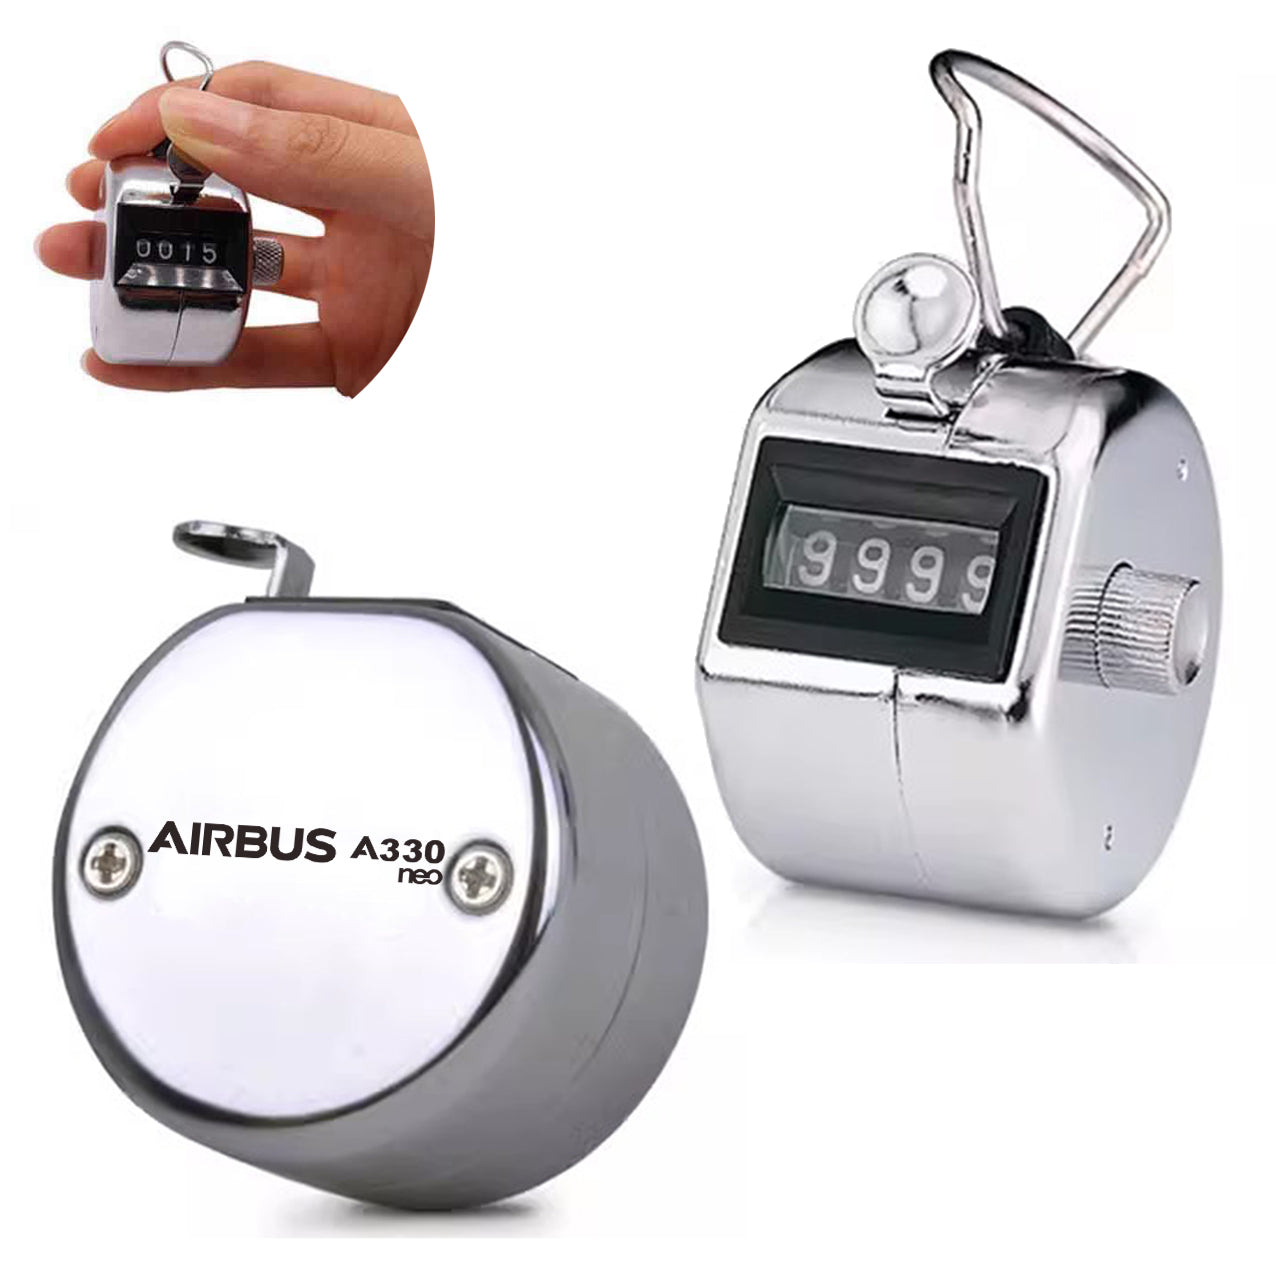 The Airbus A330neo Designed Metal Handheld Counters